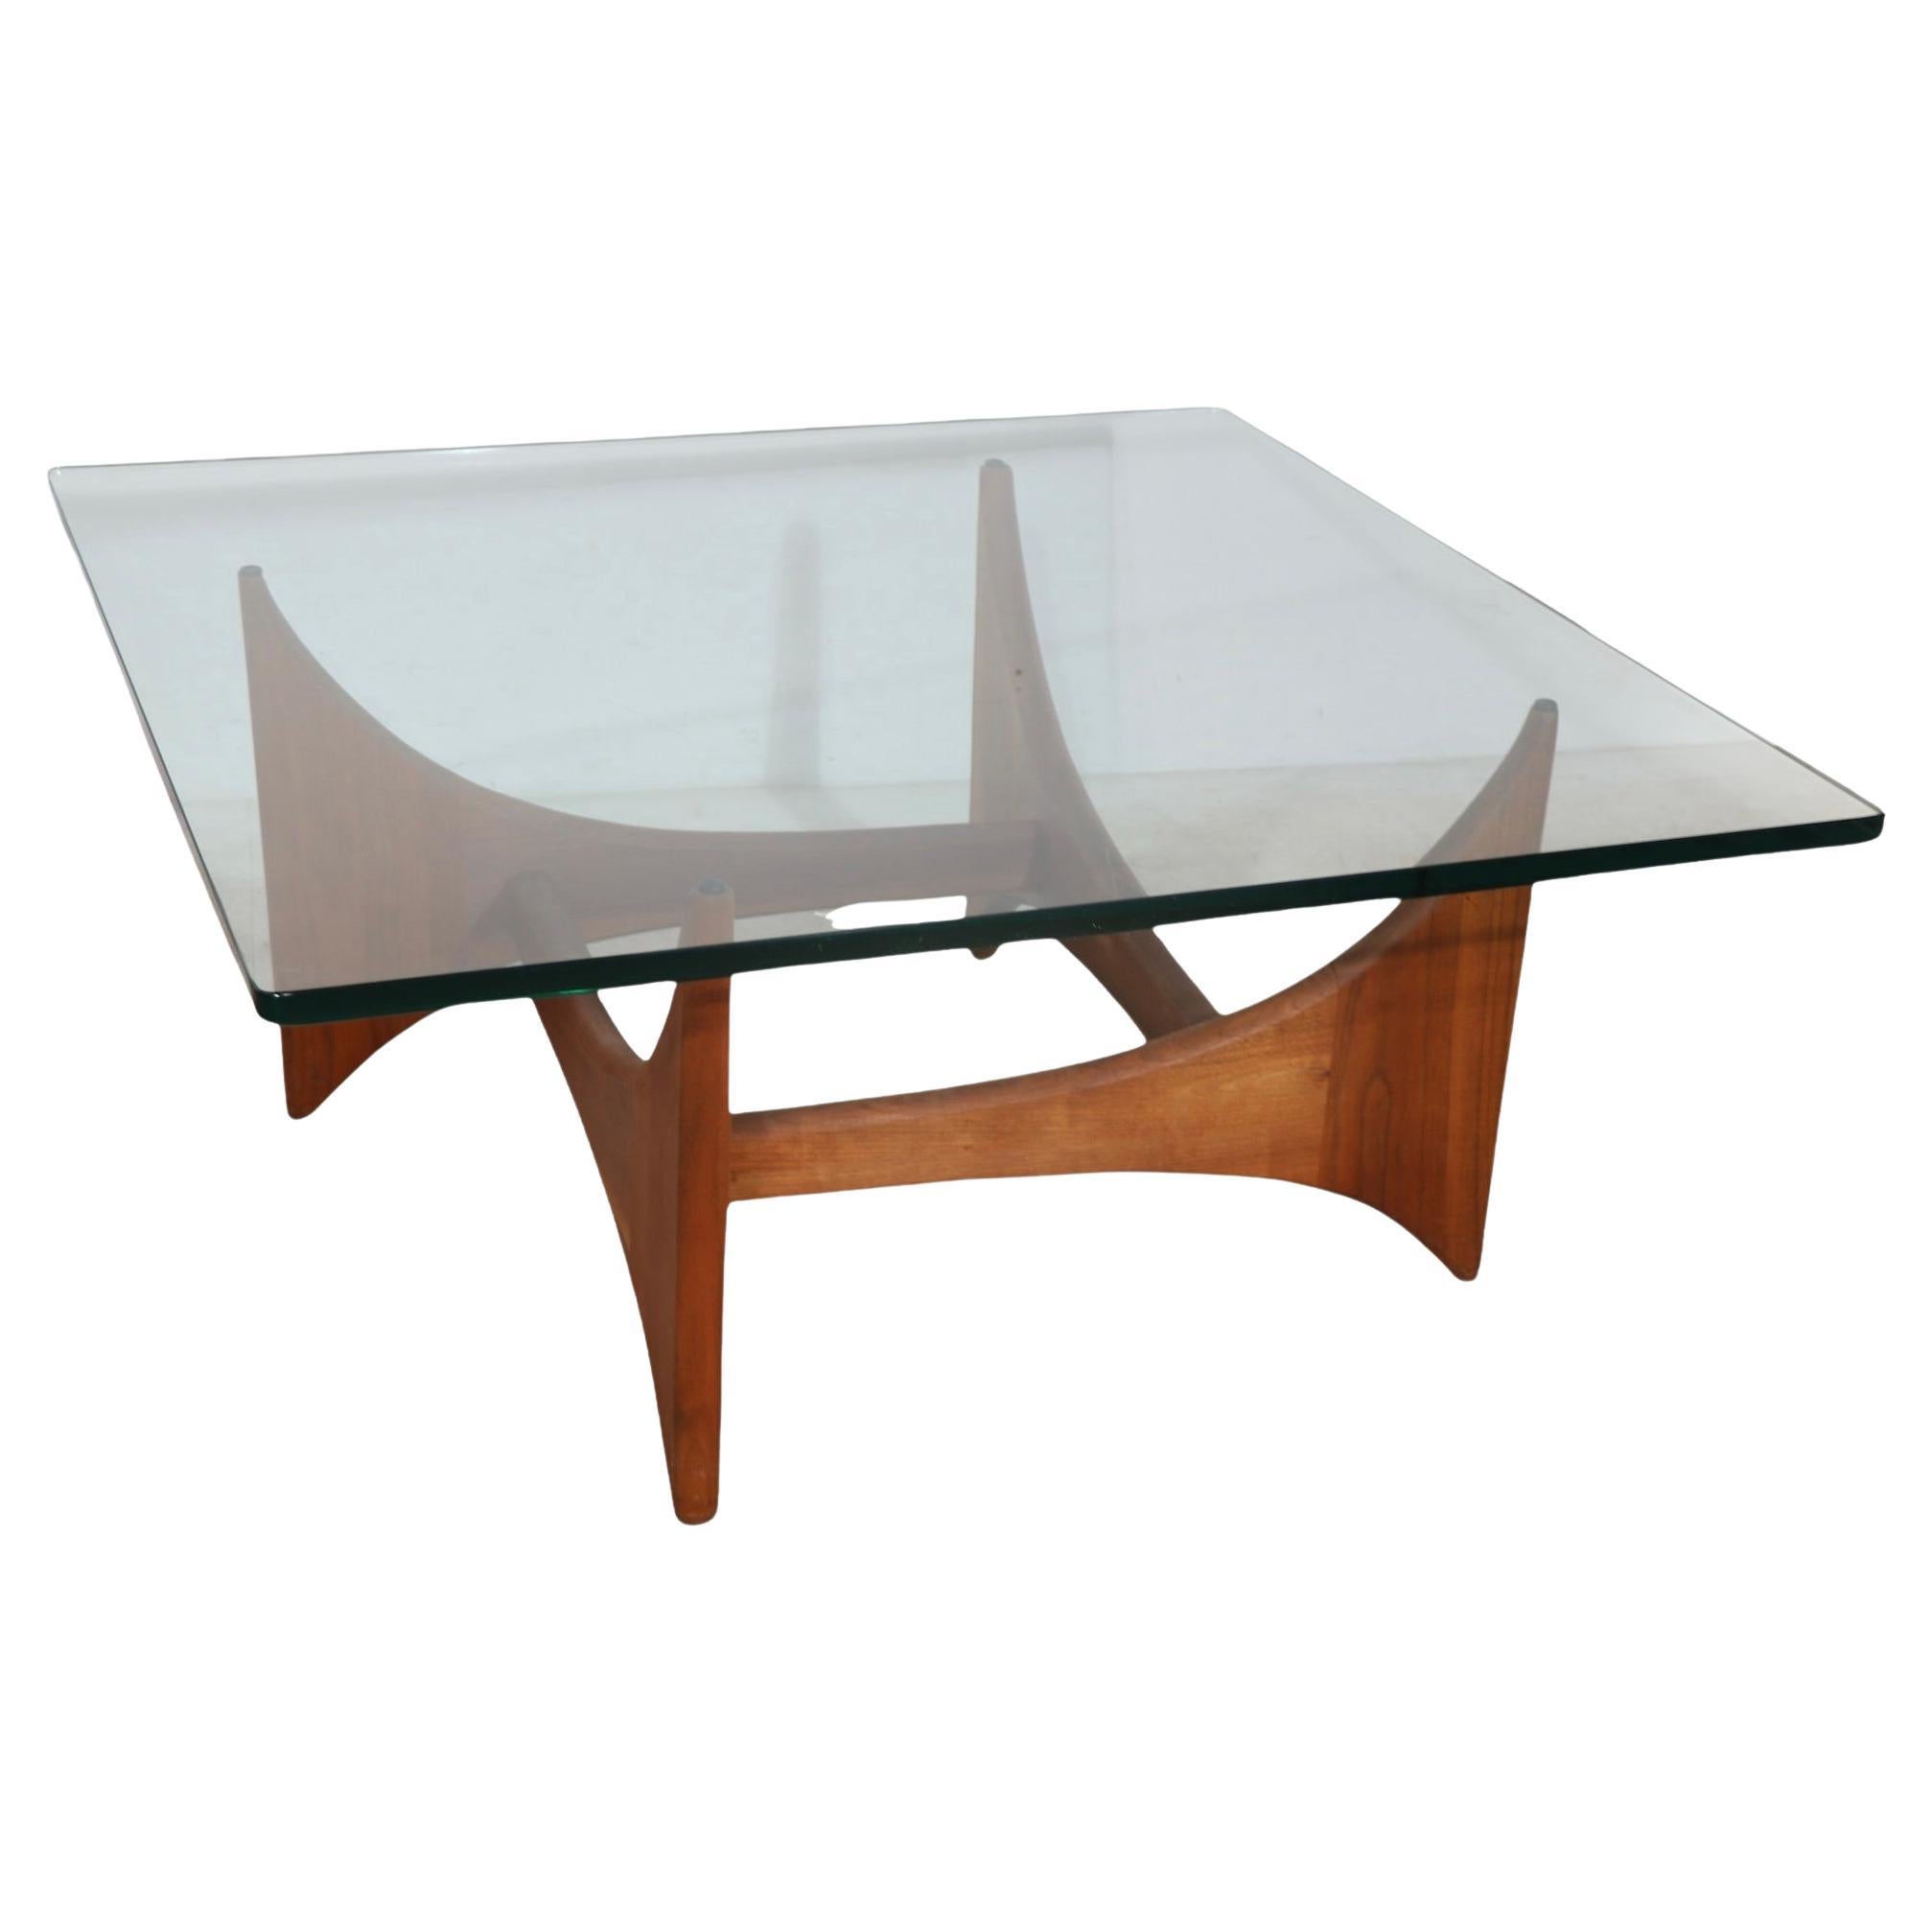 Sculptural mid century coffee table by Adrian Pearsall having solid wood base and thick ( .75” ) thick glass top.
This example is. Very fine, original, clean and ready to use condition showing only light cosmetic wear normal and consistent with